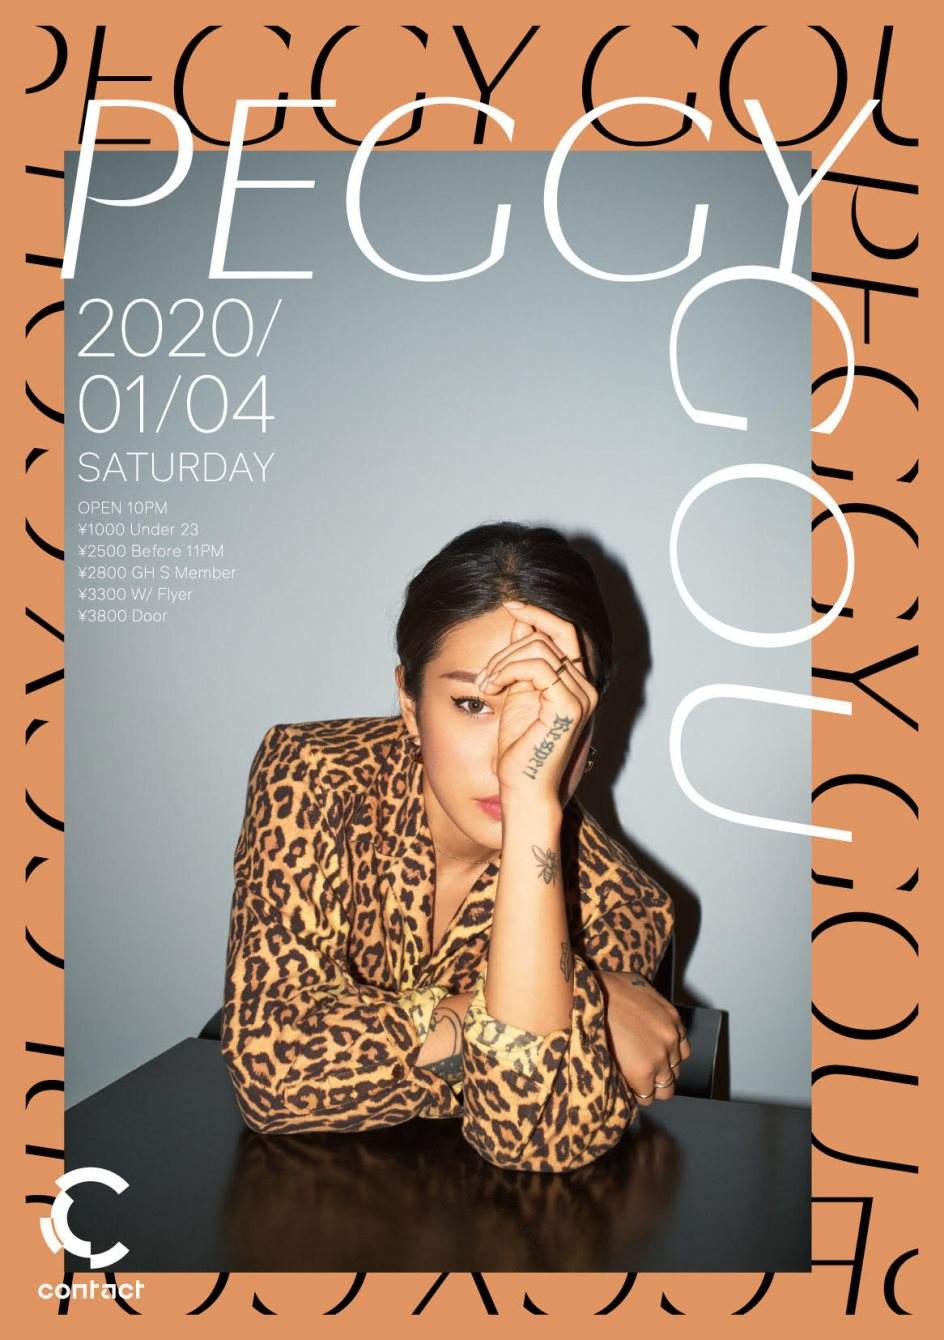 Mild Bunch presents New Year Party 2020 with Peggy Gou - フライヤー表